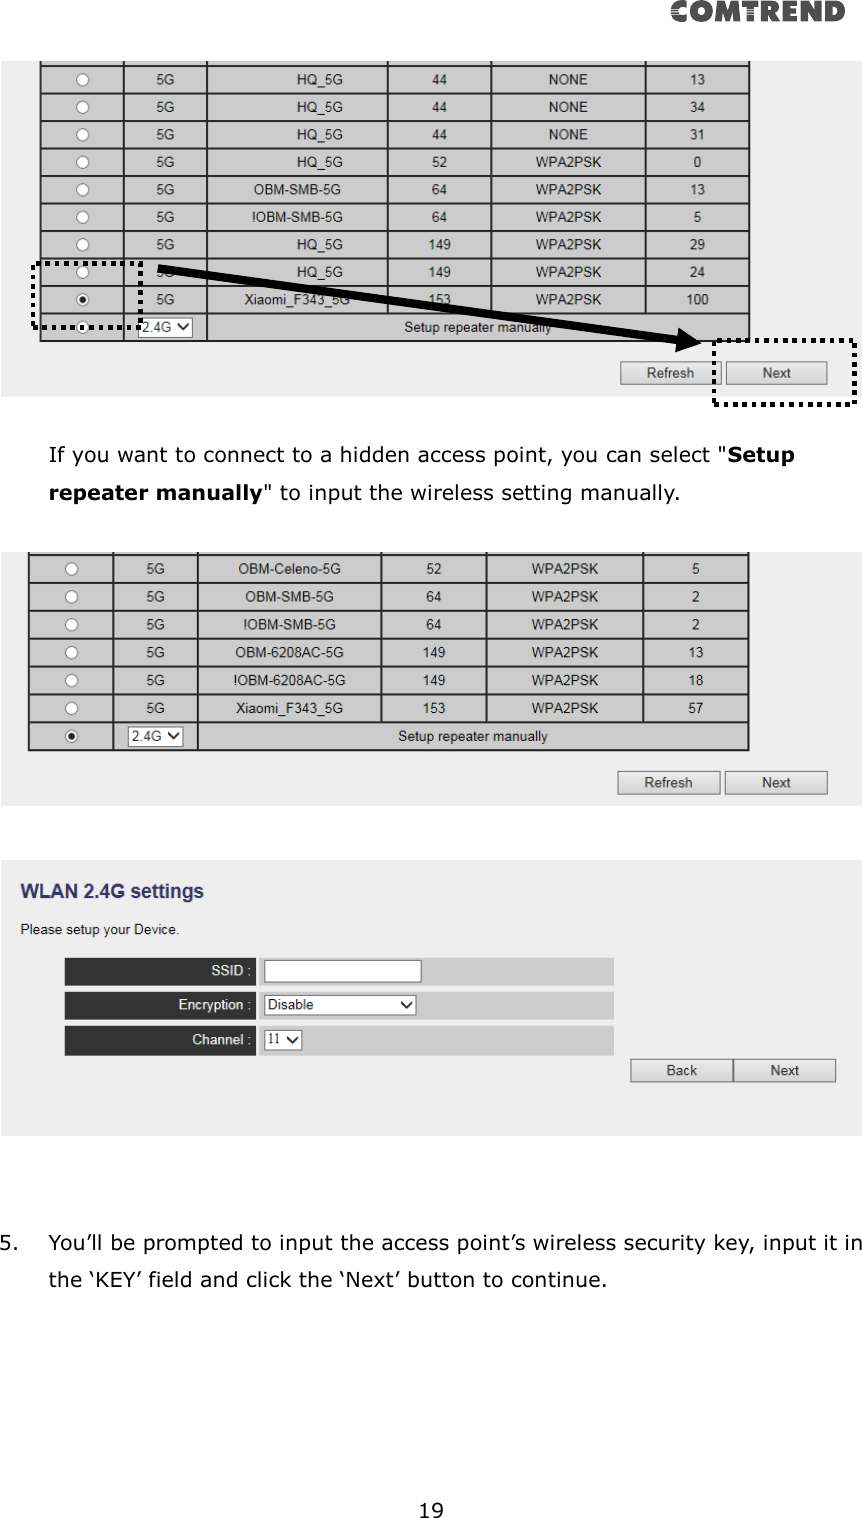       19    If you want to connect to a hidden access point, you can select &quot;Setup repeater manually&quot; to input the wireless setting manually.         5. You’ll be prompted to input the access point’s wireless security key, input it in the ‘KEY’ field and click the ‘Next’ button to continue.  